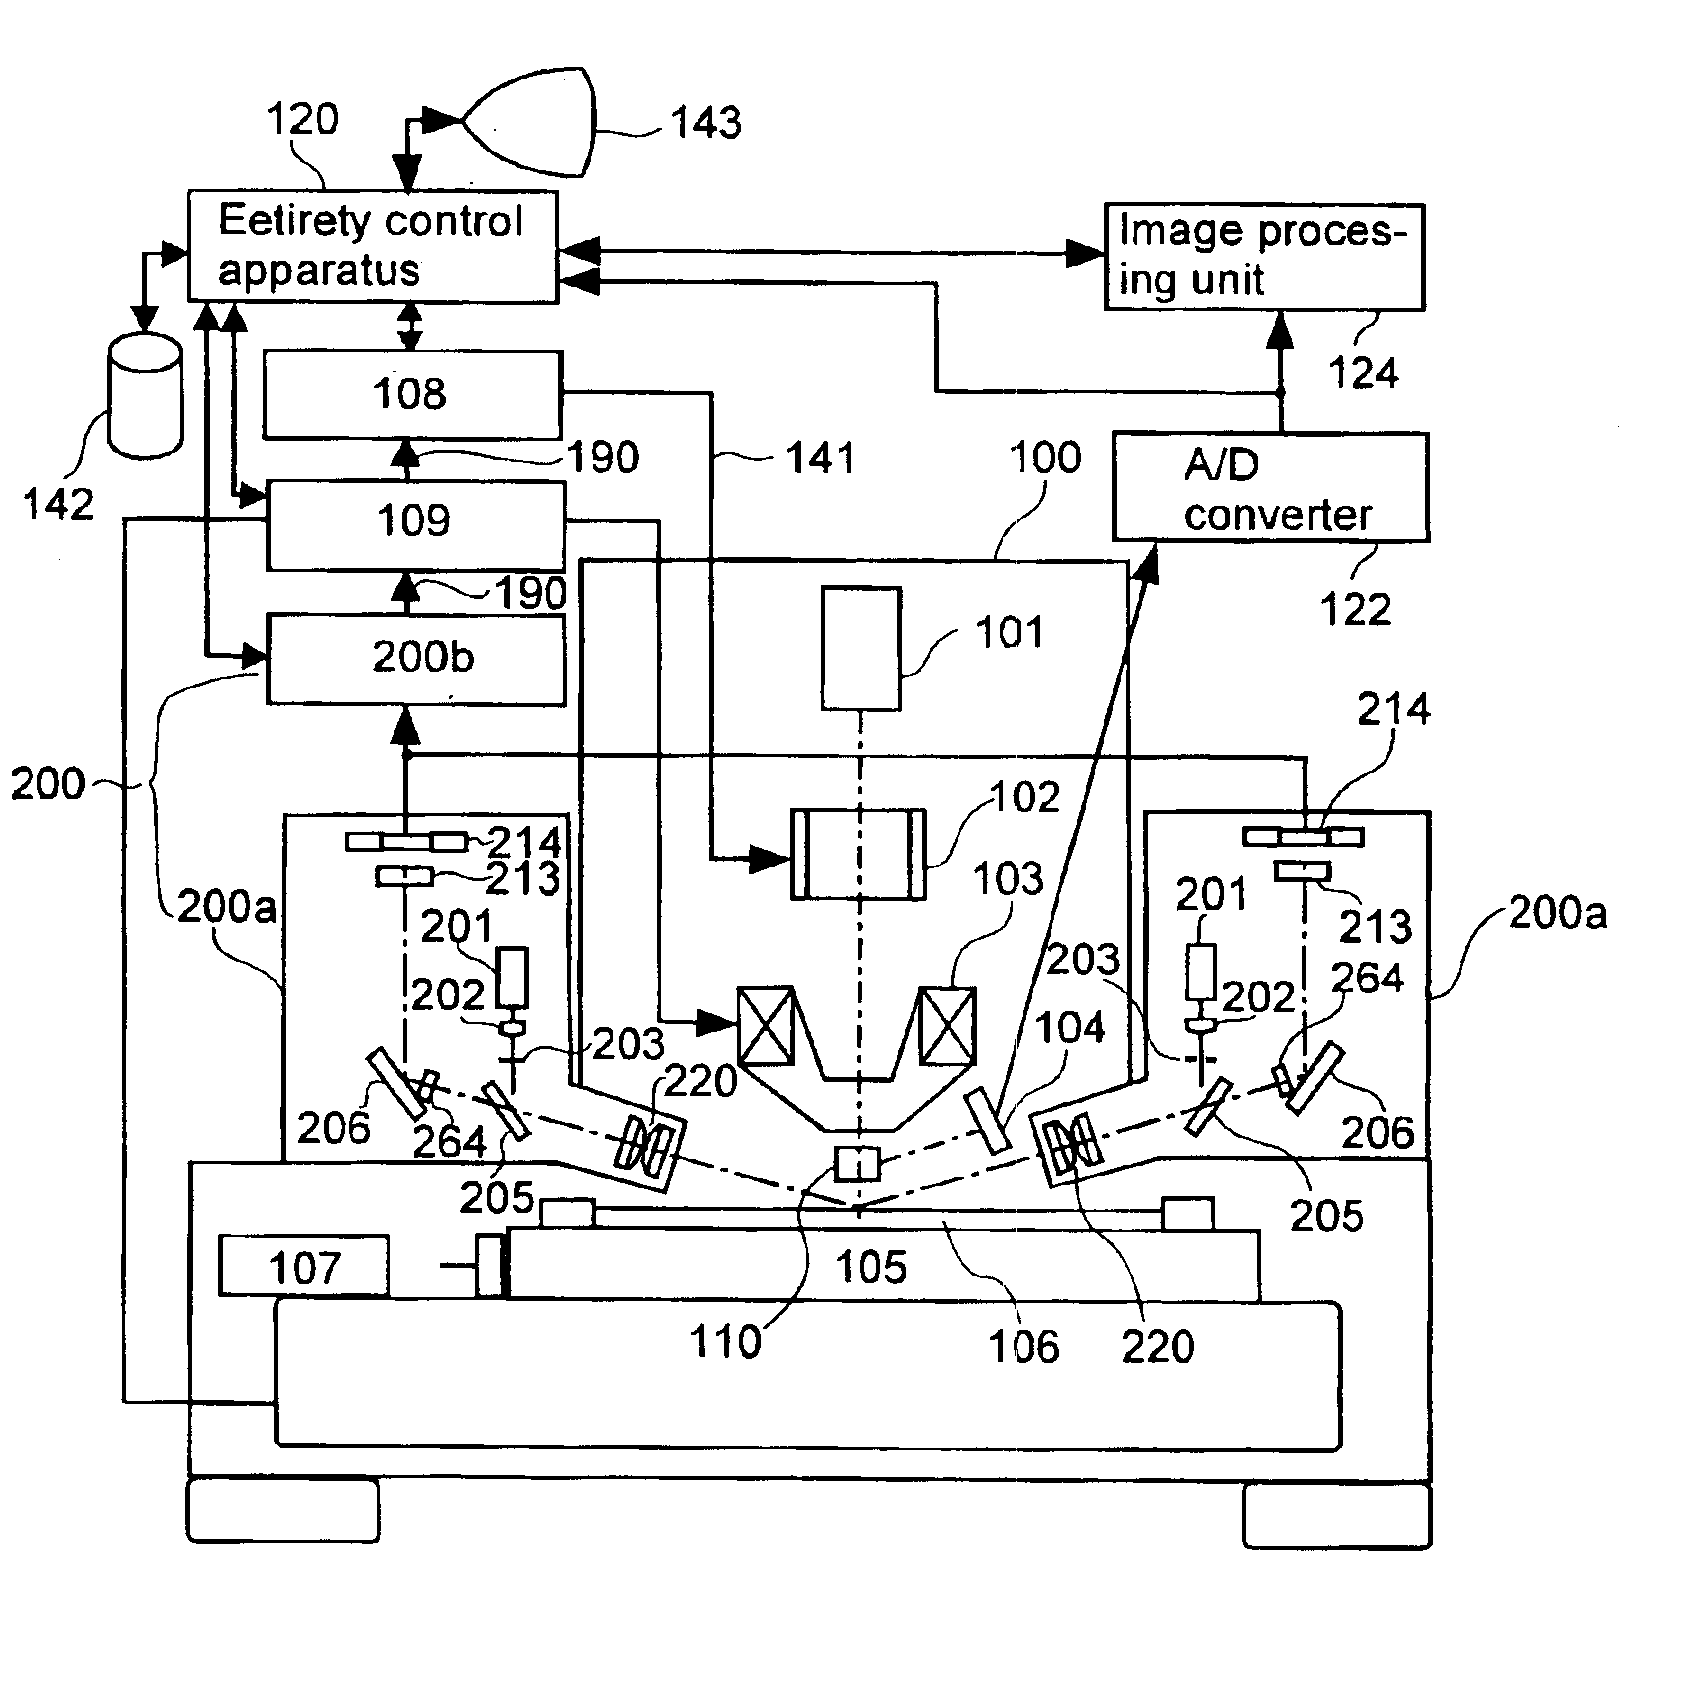 Electron beam exposure or system inspection or measurement apparatus and its method and height detection apparatus